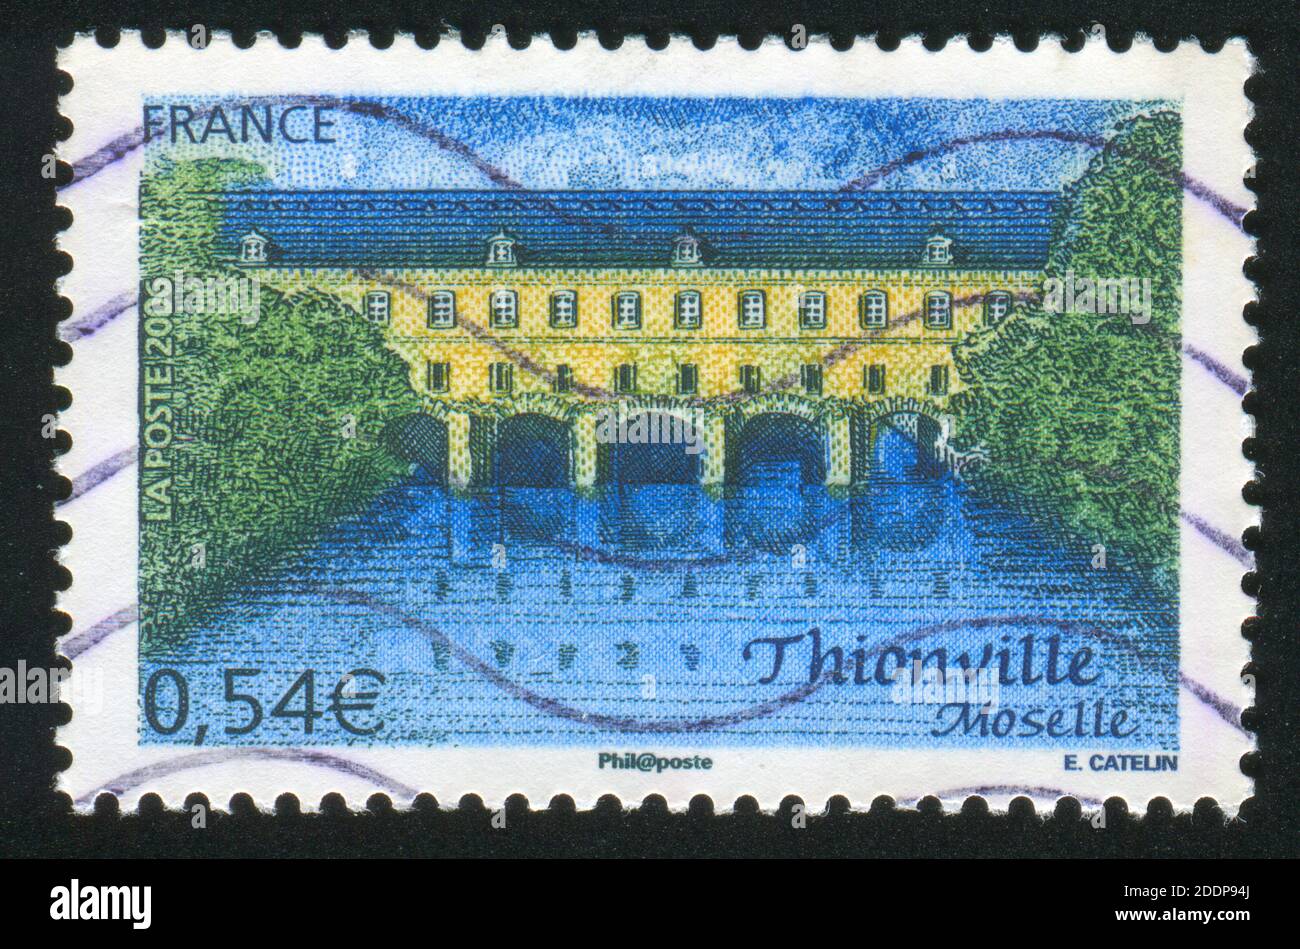 FRANCE - CIRCA 2006: stamp printed by France, shows Thionville Moselle, circa 2006 Stock Photo